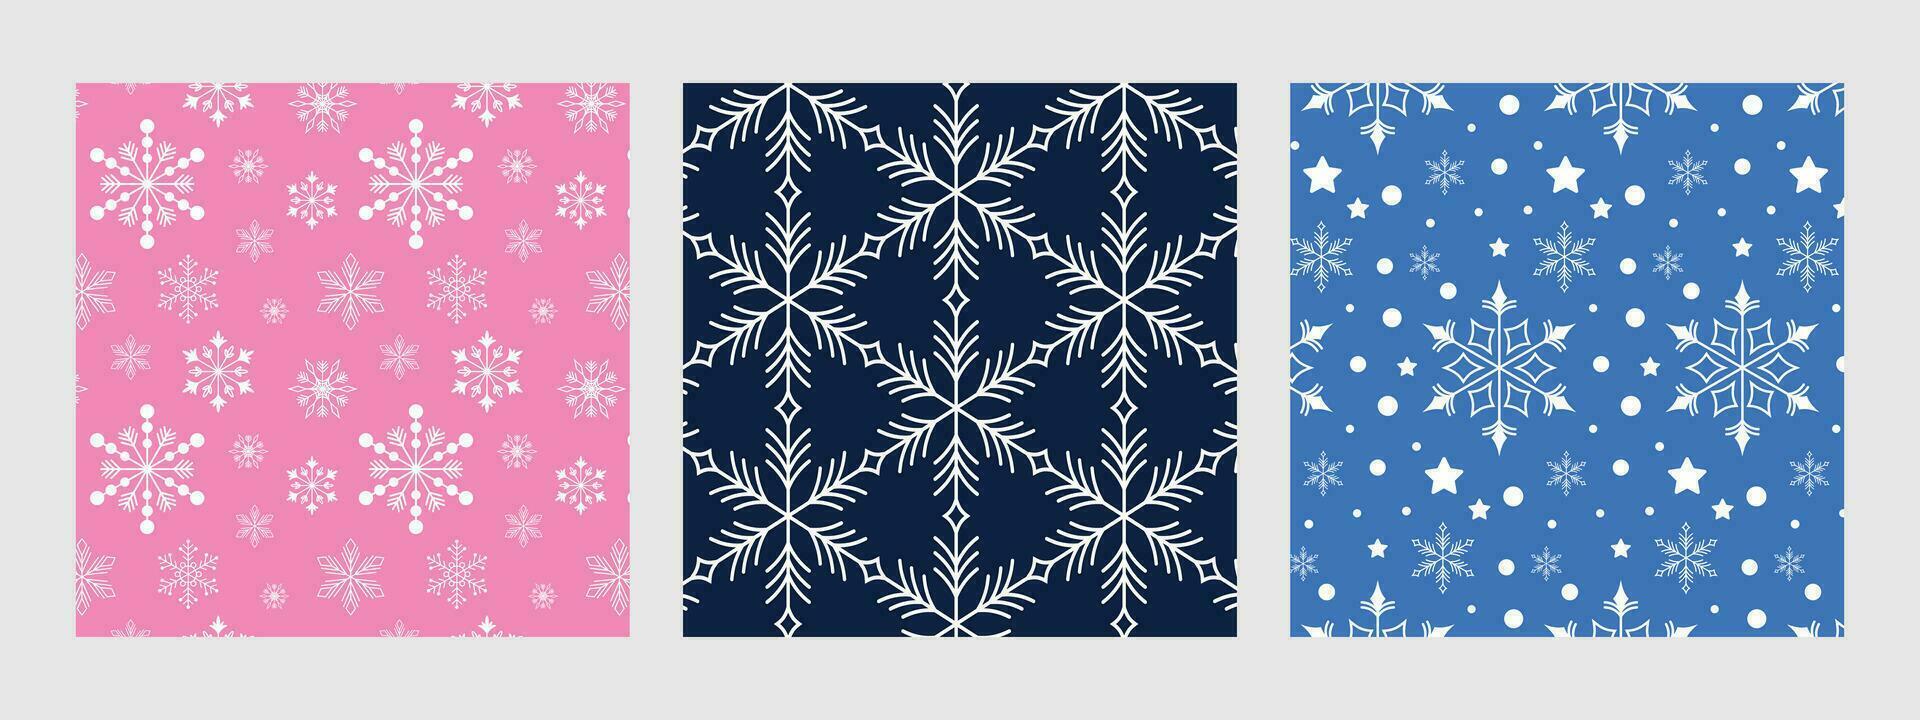 Set of winter seamless patterns with snowflakes. Background of snowflakes on pink, blue and light blue. vector